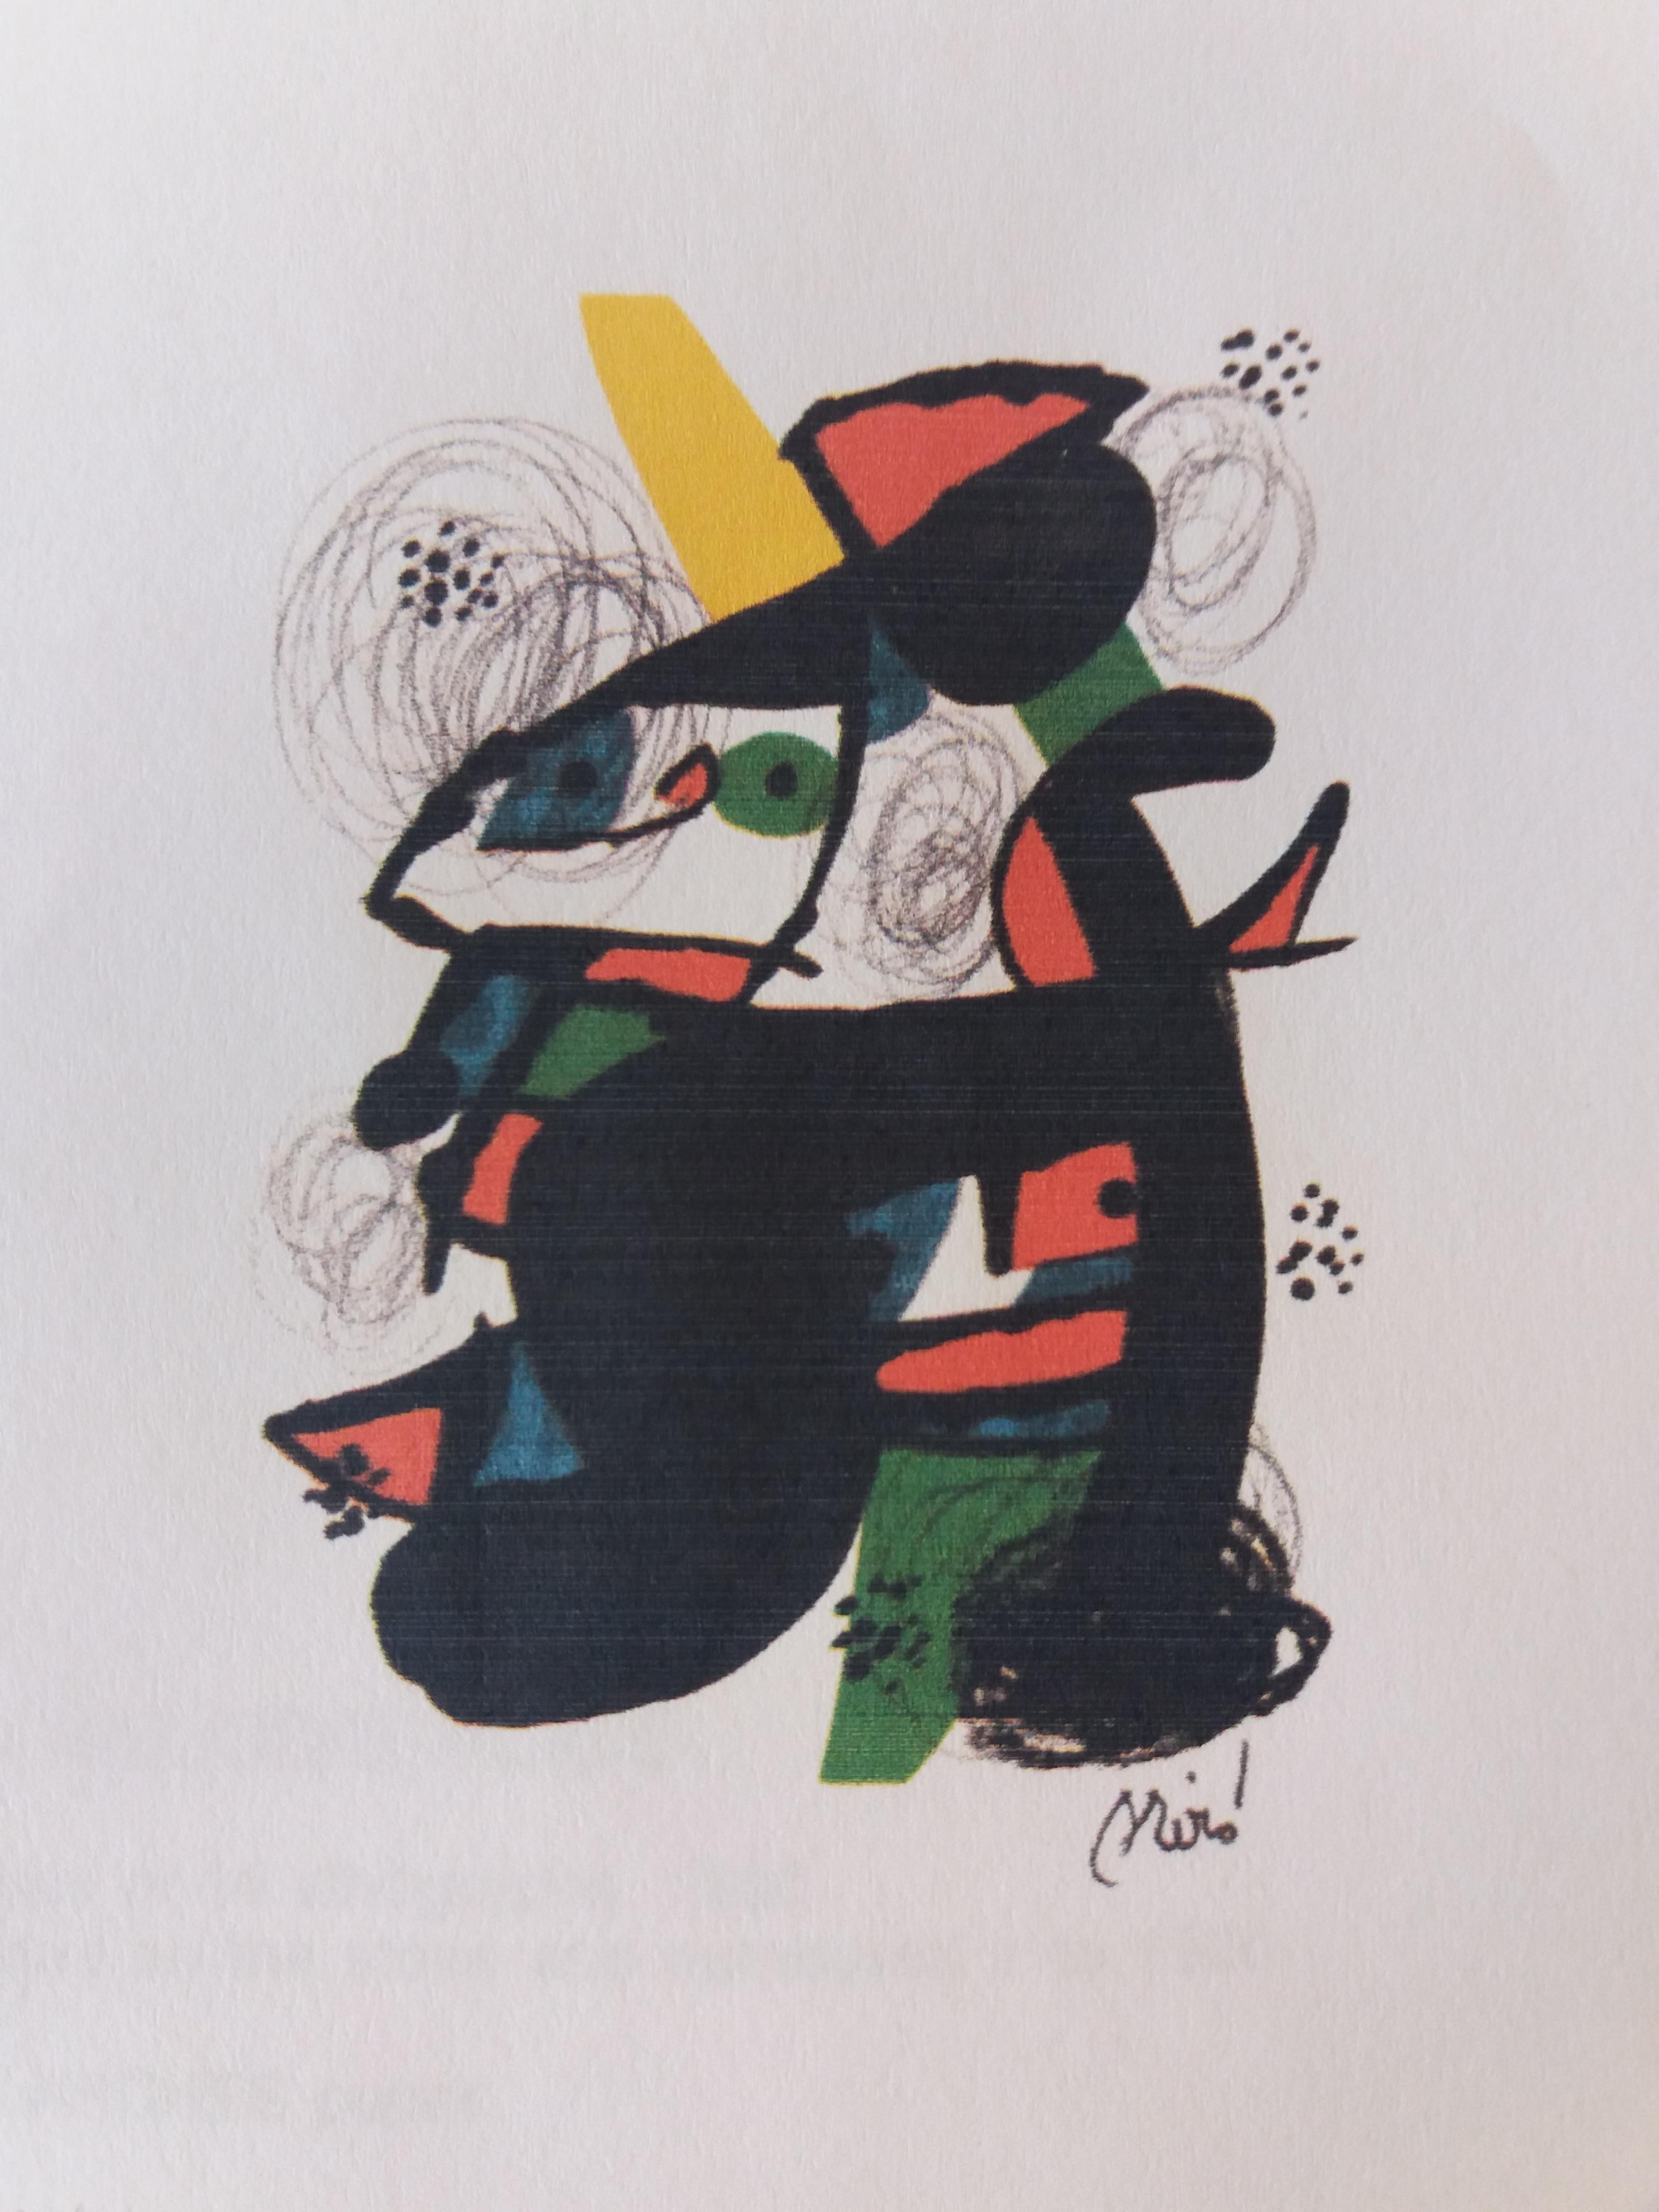 Joan Miró Abstract Print - Miro  melodie acide. original lithograph painting